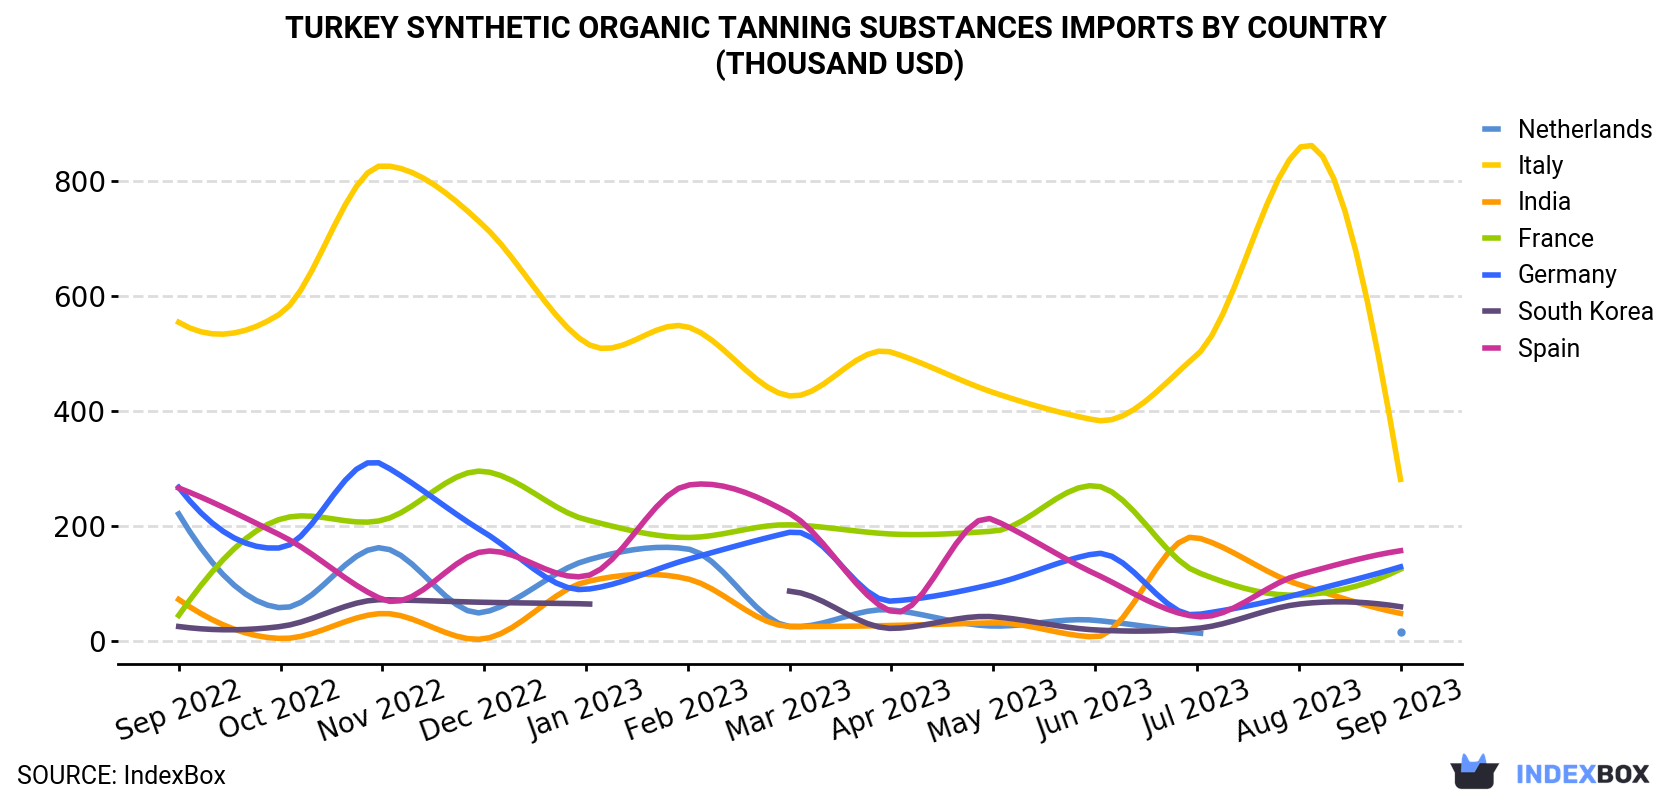 Turkey Synthetic Organic Tanning Substances Imports By Country (Thousand USD)